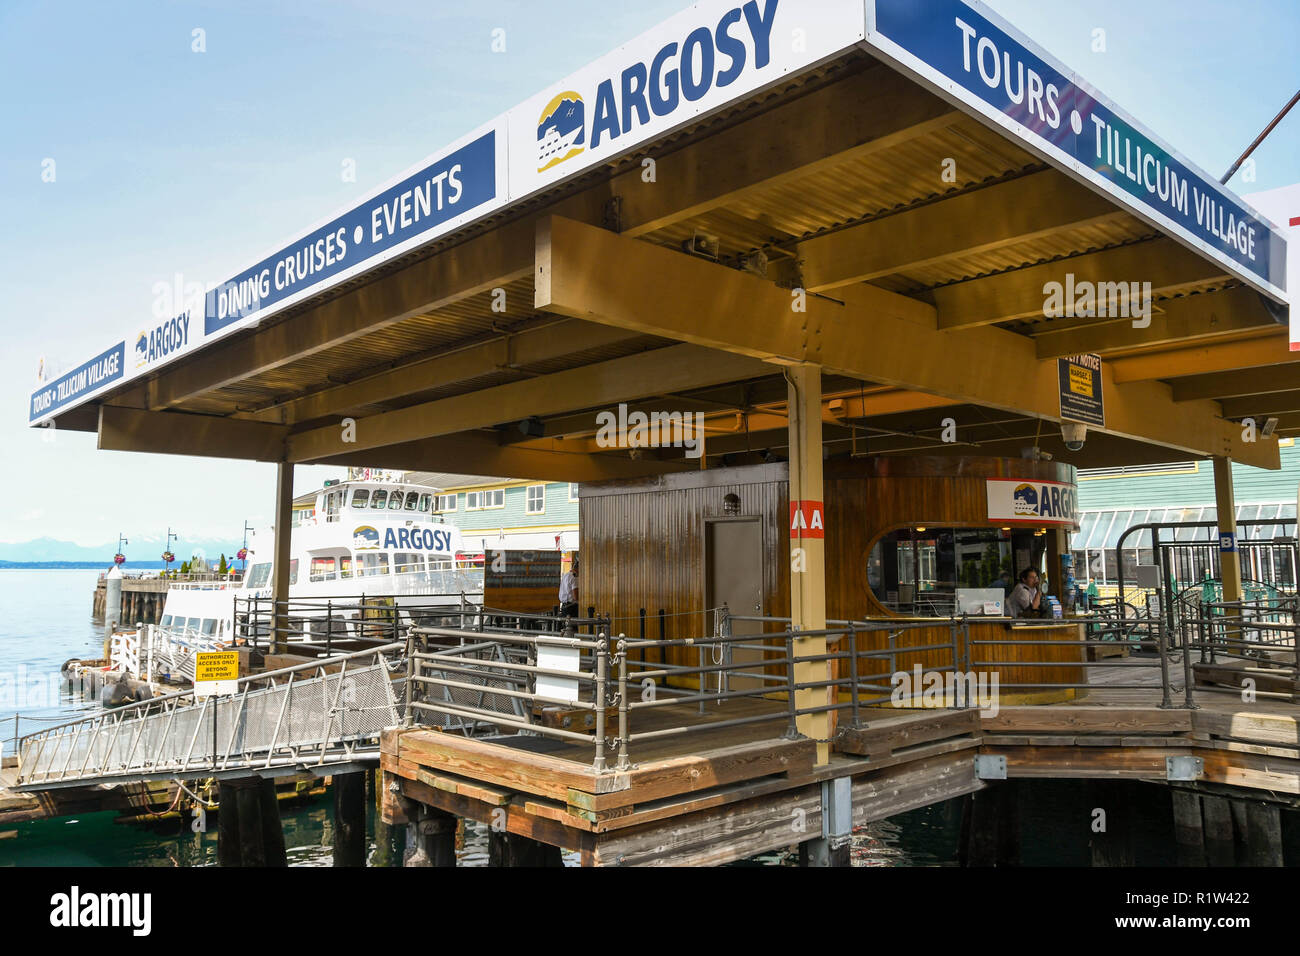 SEATTLE, WASHINGTON STATE, USA - JUNE 2018: Ticket office for the Argosy sightseeing cruise boat company in Seattle. Stock Photo